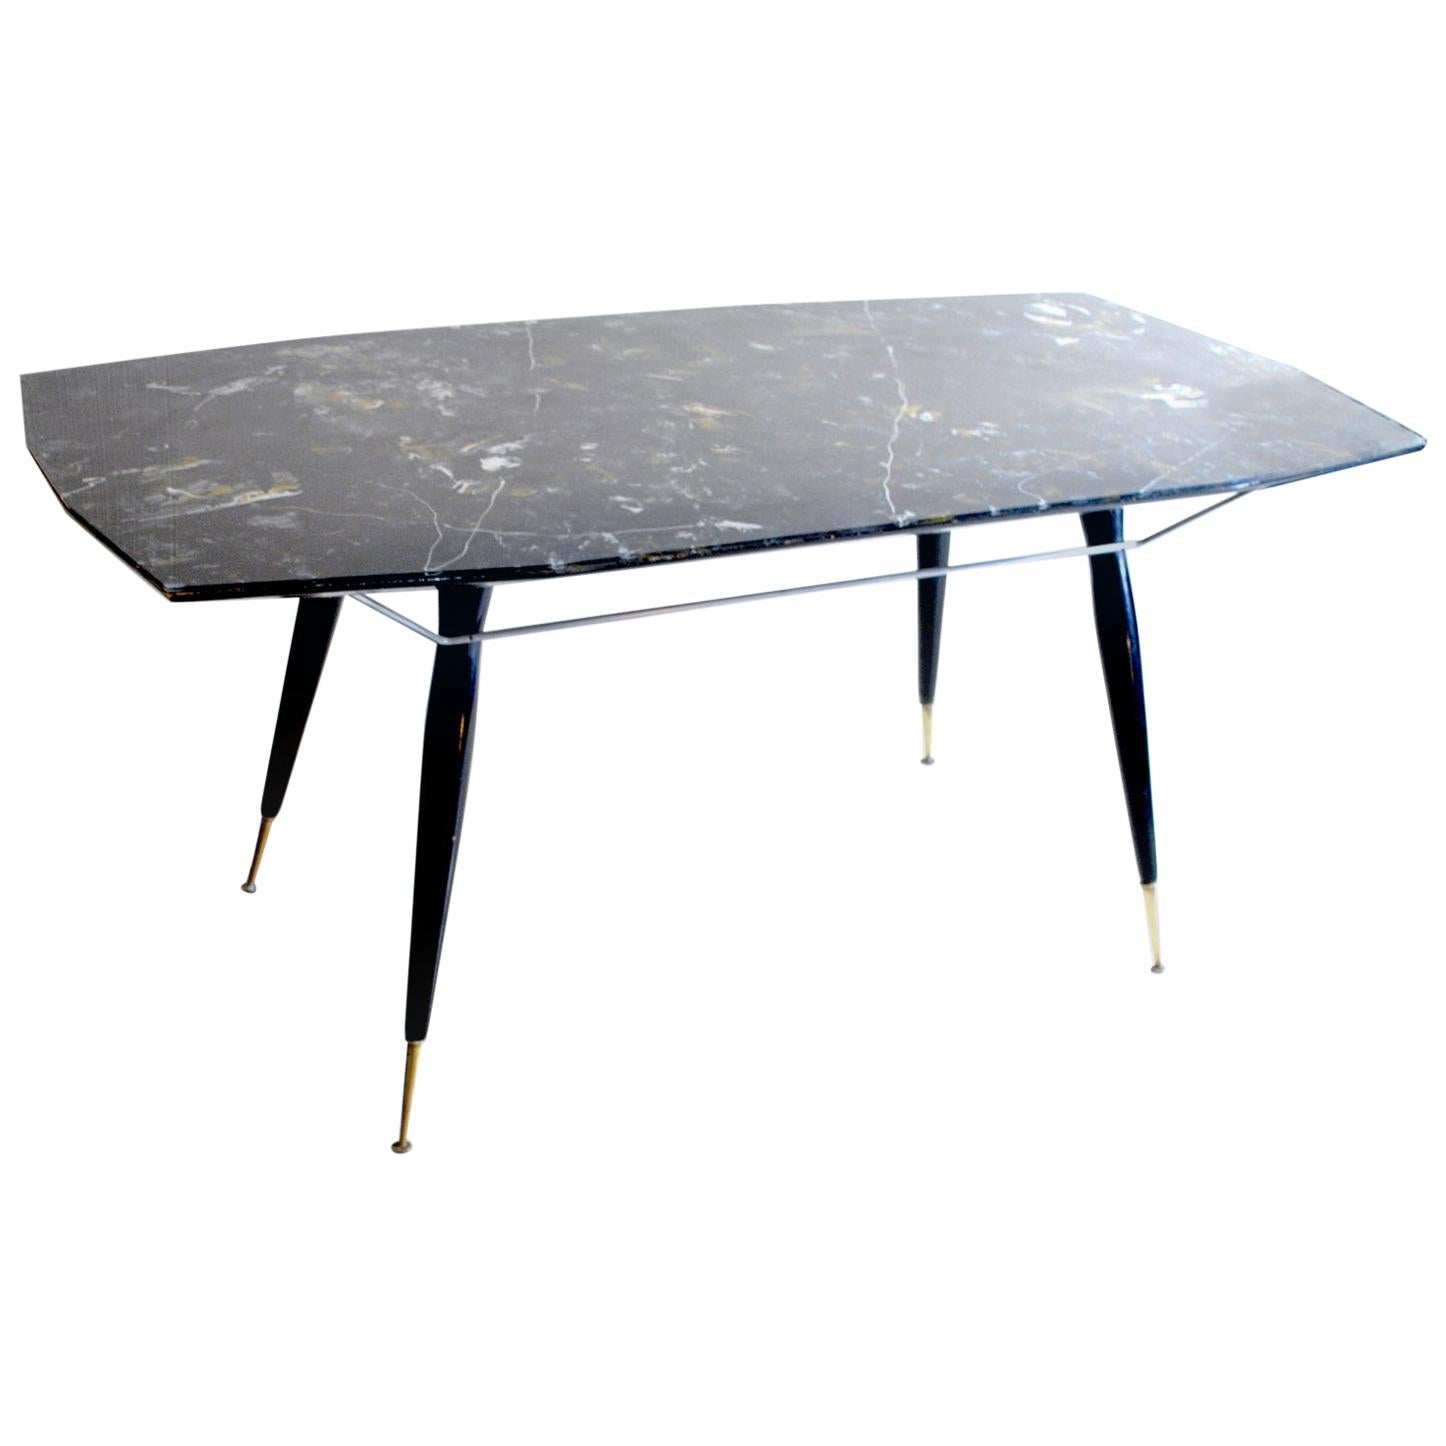 Italian Midcentury Table from the 1960s For Sale